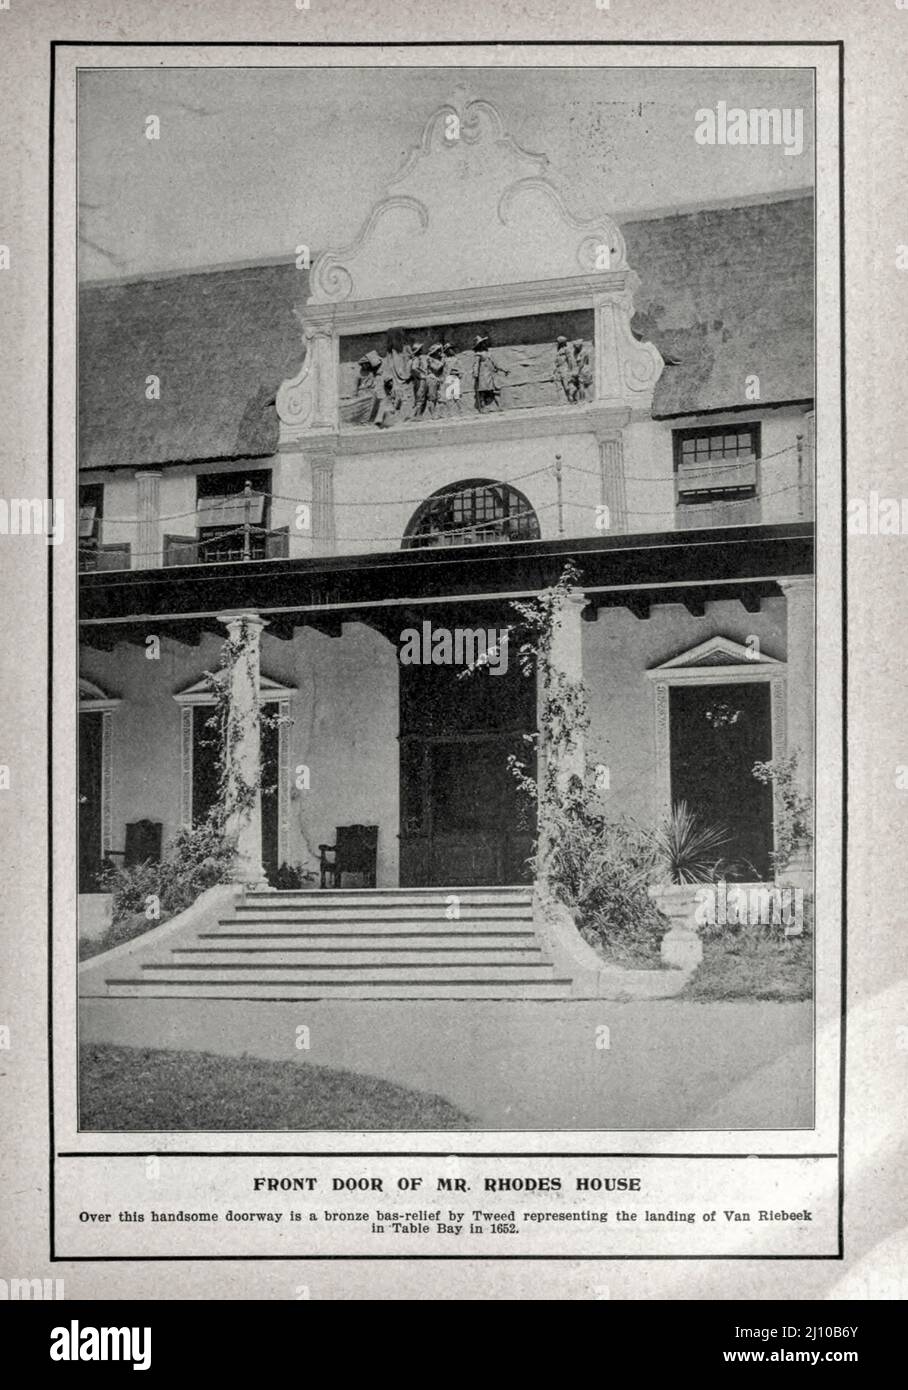 FRONT DOOR OF MR. RHODES HOUSE. Over this handsome doorway is a bronze bas-relief by Tweed representing the landing of Van Riebeek in Table Bay in 1662.Black and white photograph from the book ' South Africa; its history, heroes and wars ' by William Douglas Mackenzie, and Alfred Stead, Publisher Chicago, Philadelphia : Monarch Book Company in 1890 Stock Photo